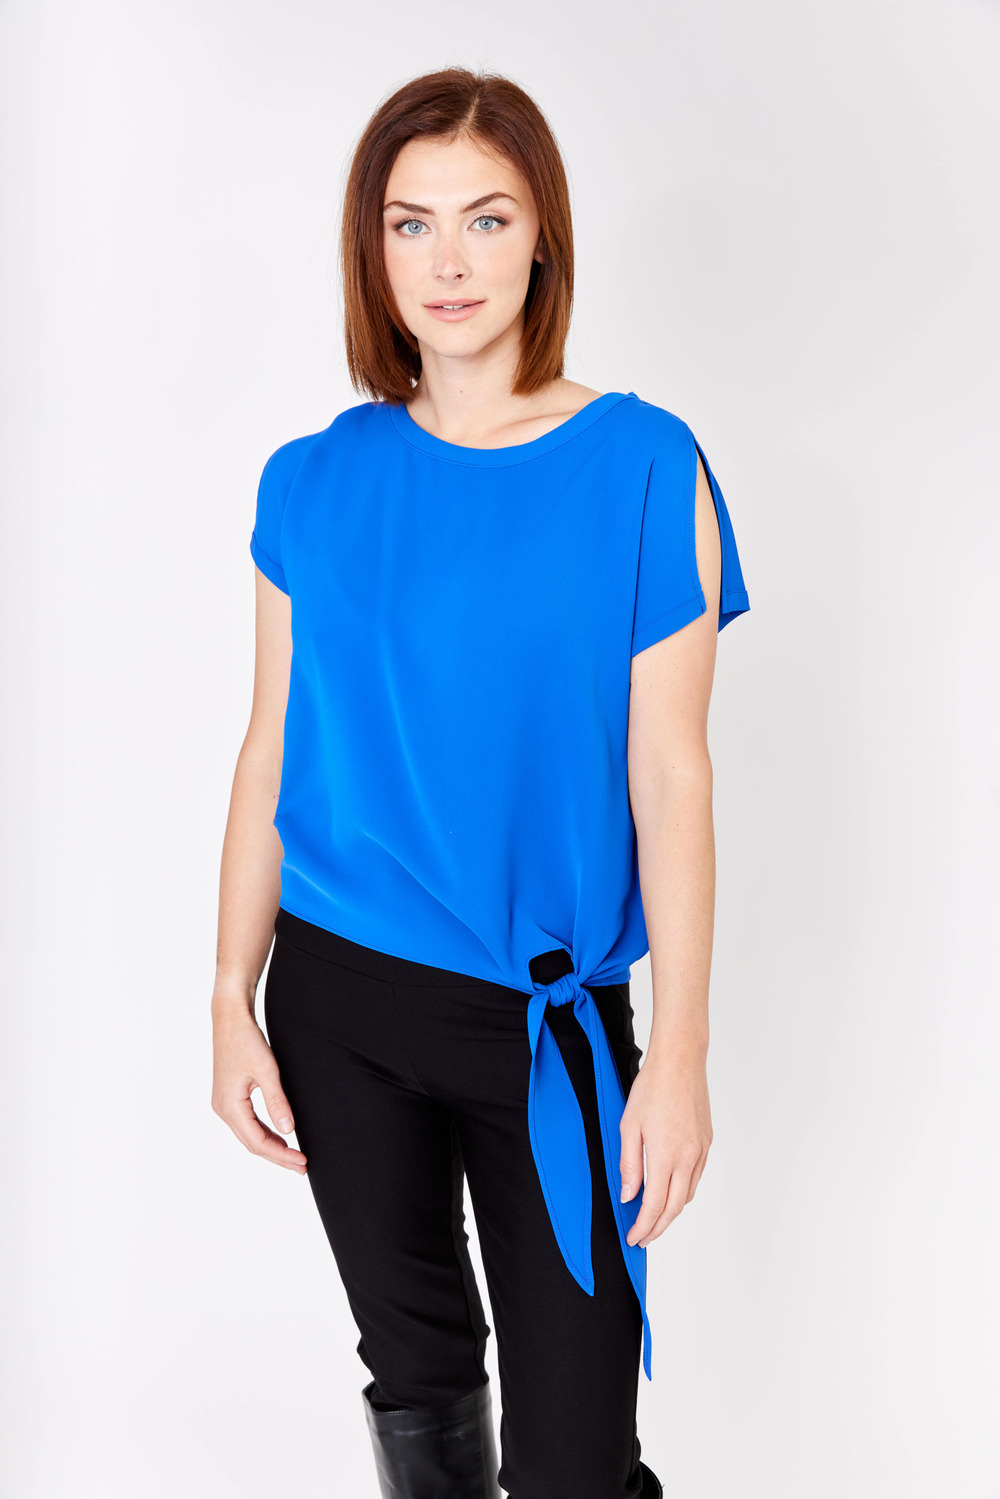 Short Sleeve Tie Front Top Style 181224. Royal